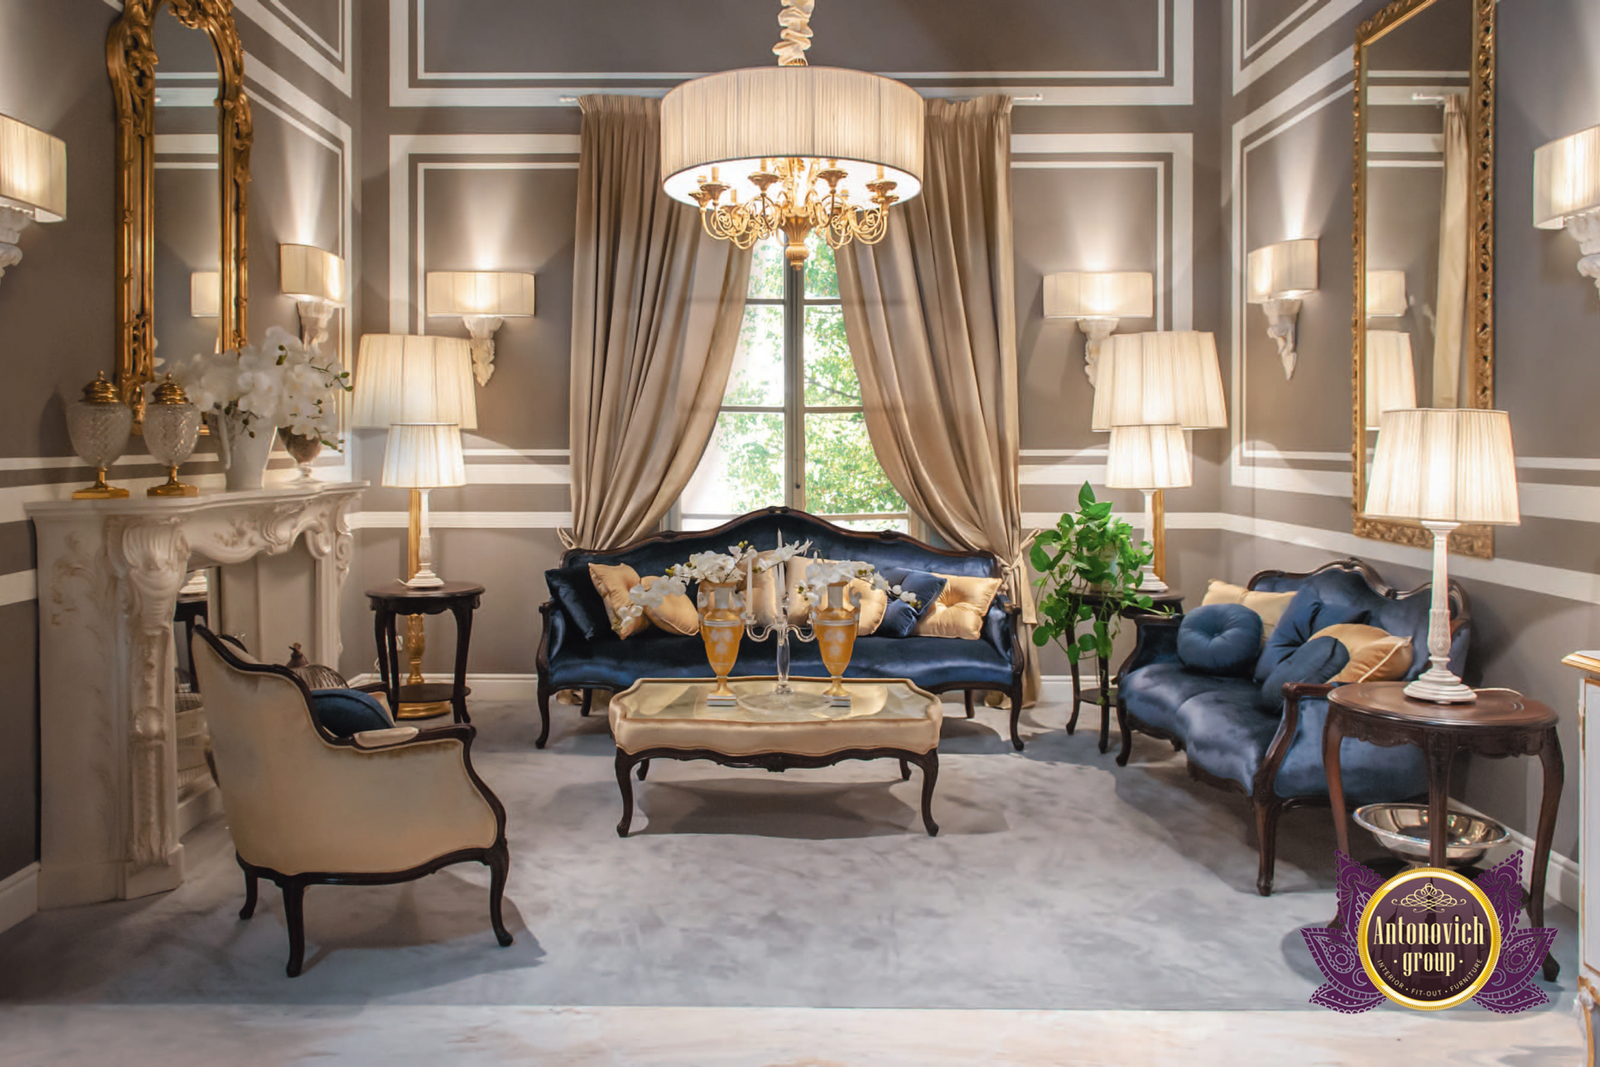 What to Expect When Buying Luxury Furniture in Dubai?